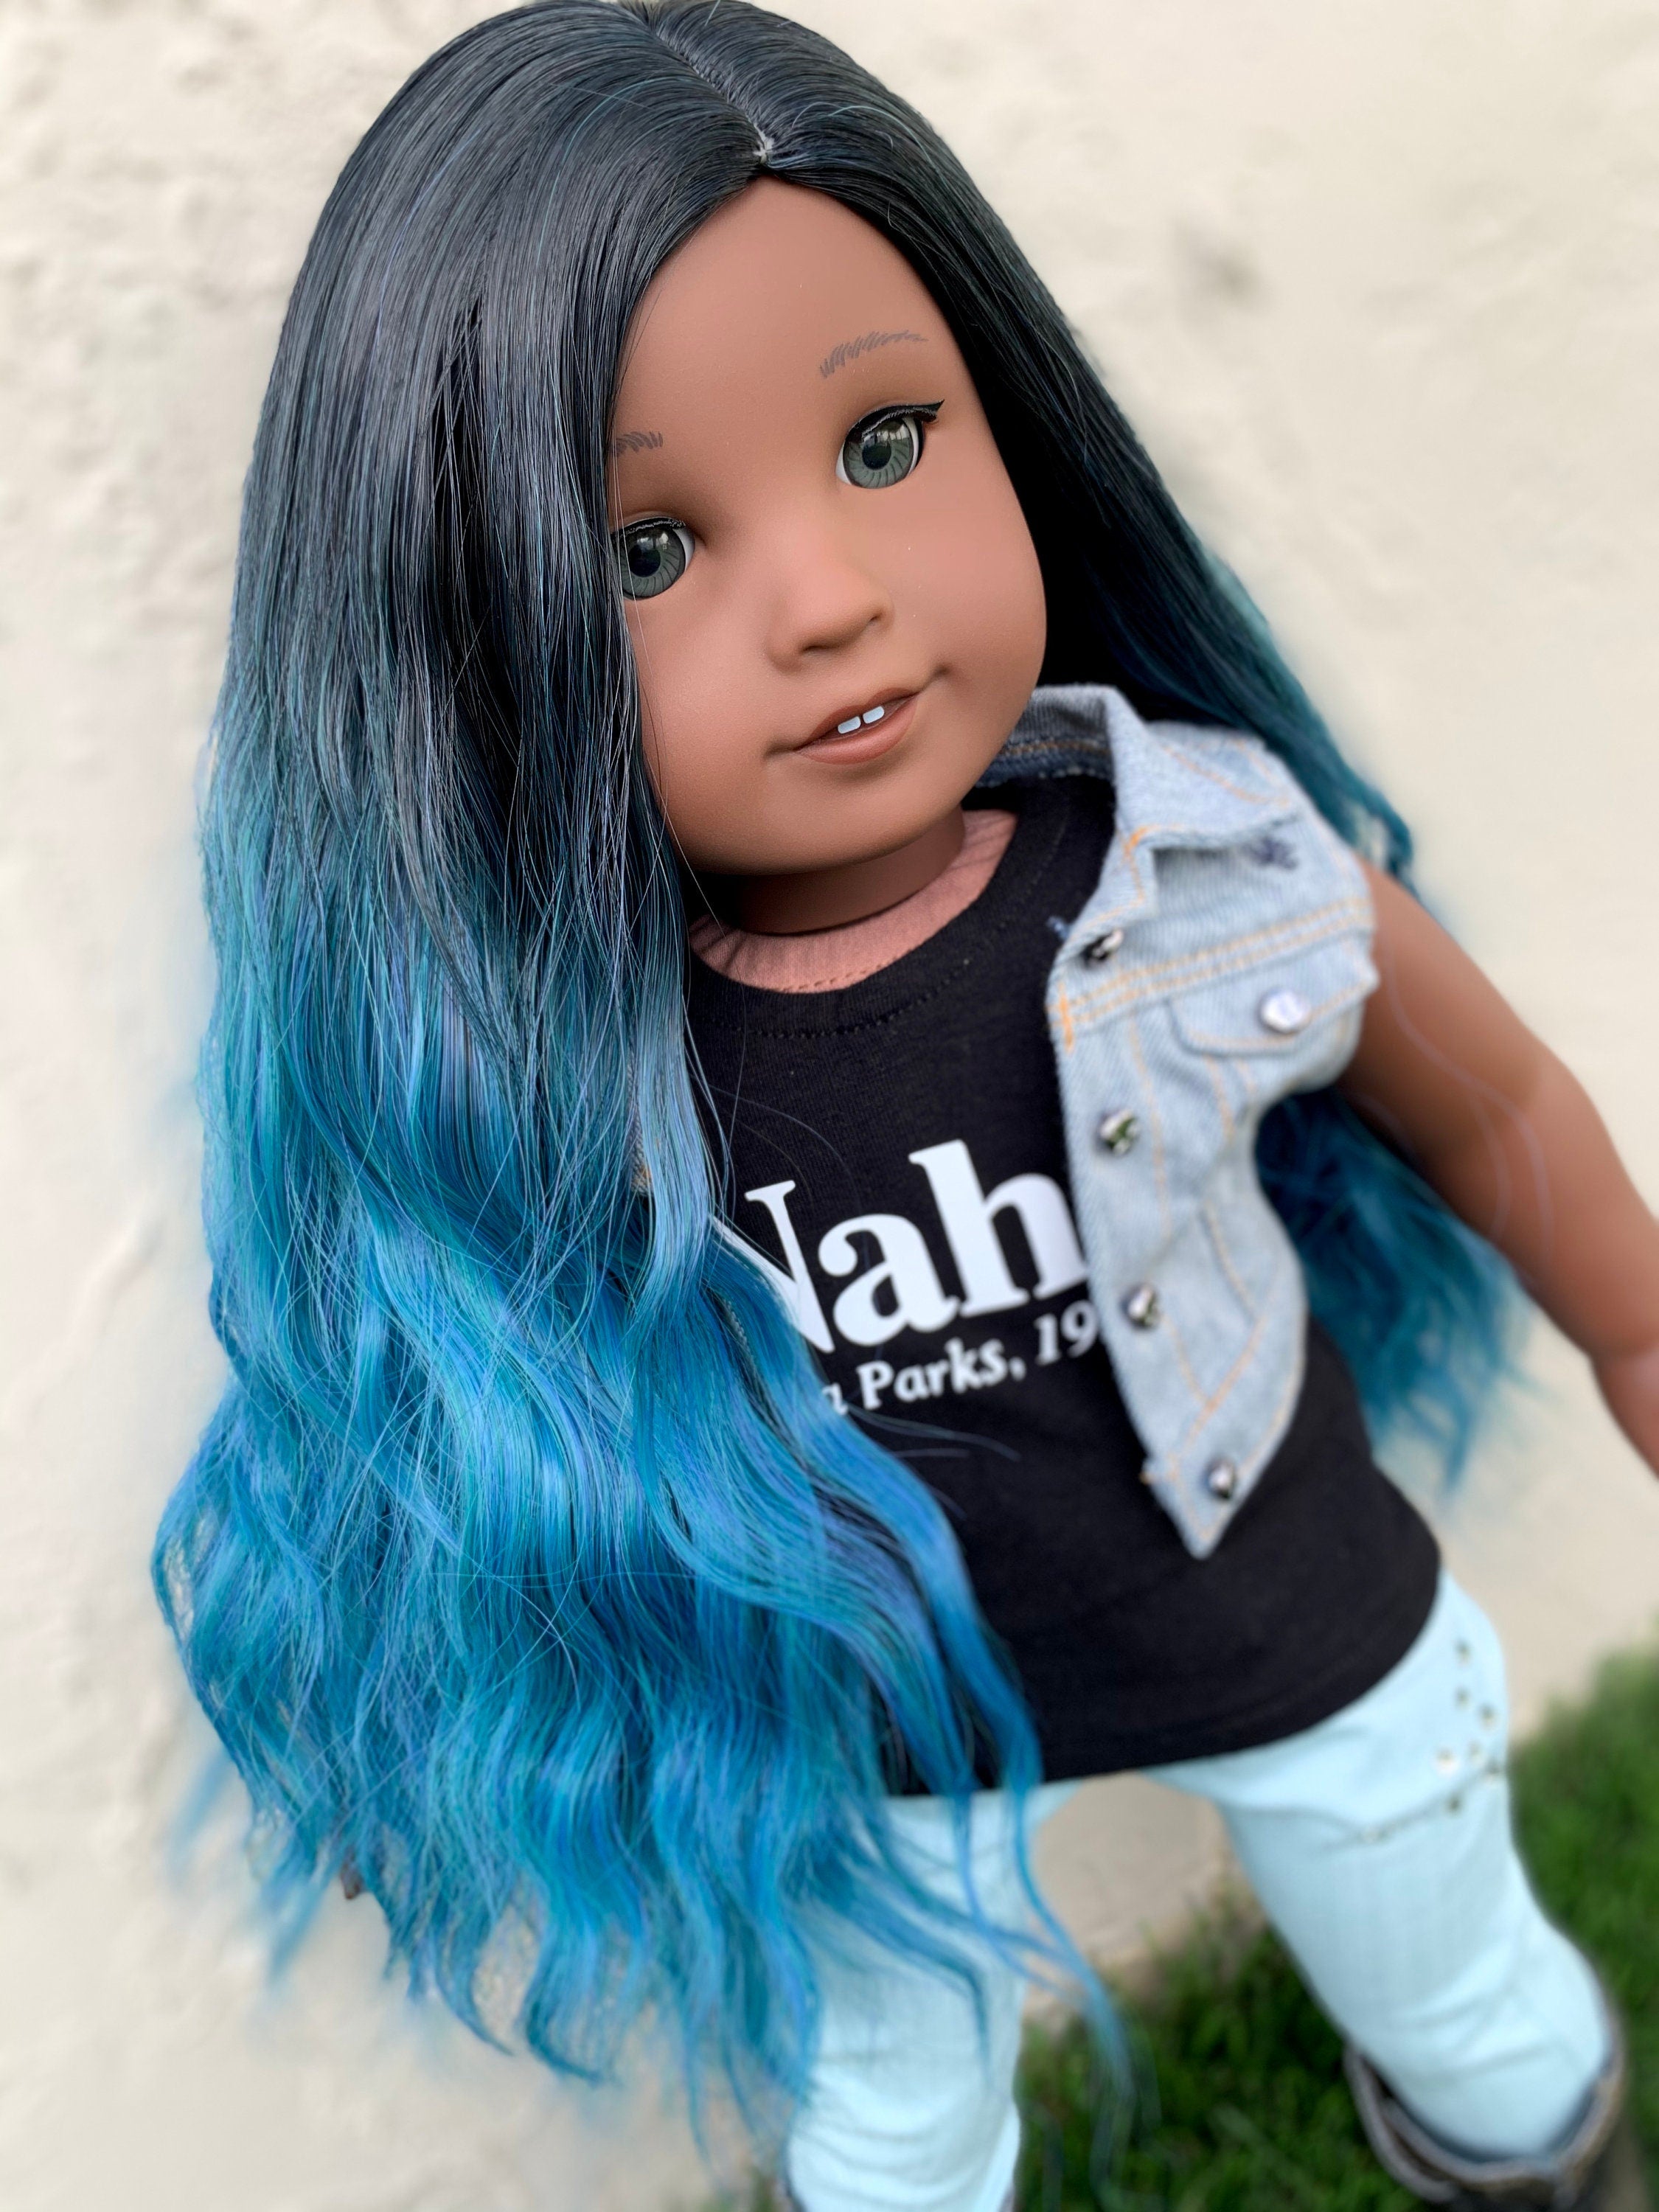 Custom DYED OMBRE Doll Wig for 18" American Girl Doll Heat Safe Tangle Resistant-fits 10-11" head size of all 18" dolls Blue ombre